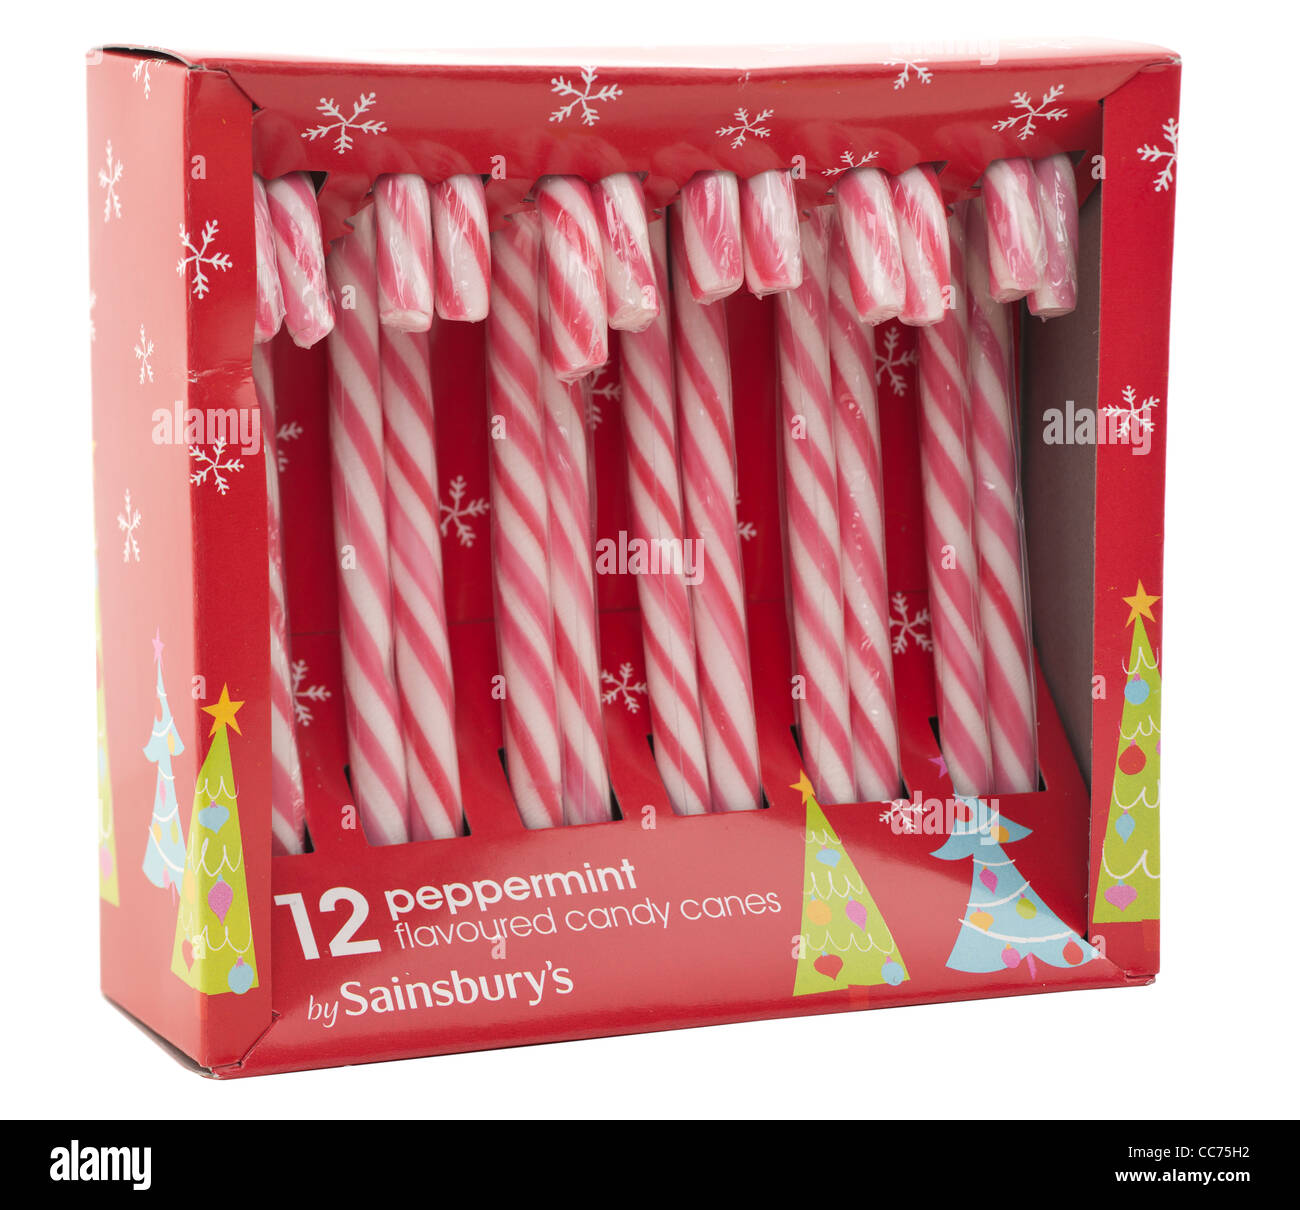 Box of 12 Peppermint flavoured candy canes from Sainsburys Stock Photo